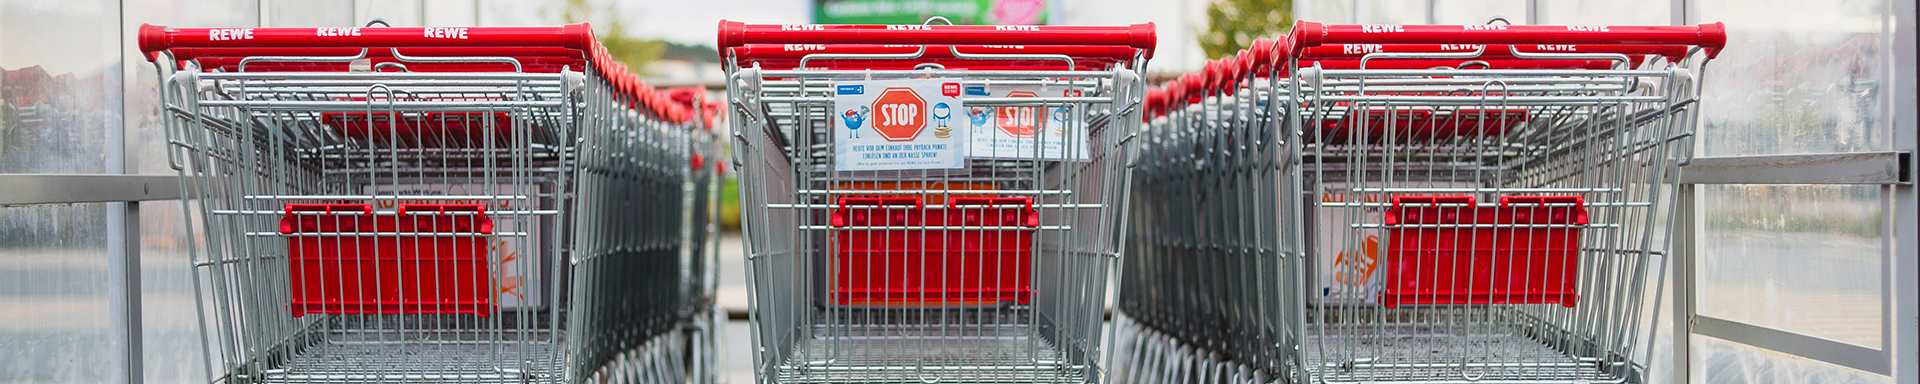 red shopping trolleys